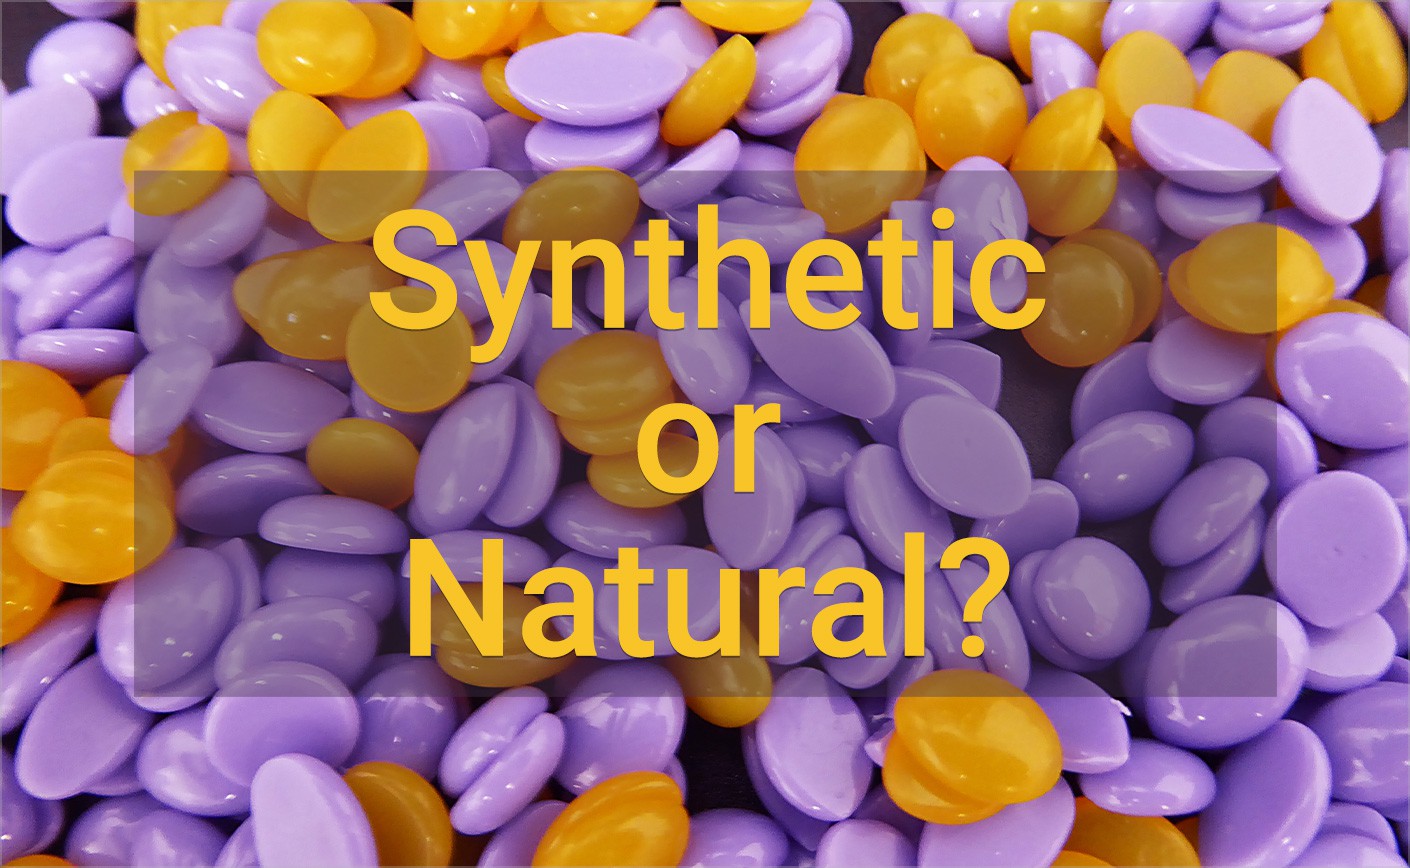 Synthetic or Natural?